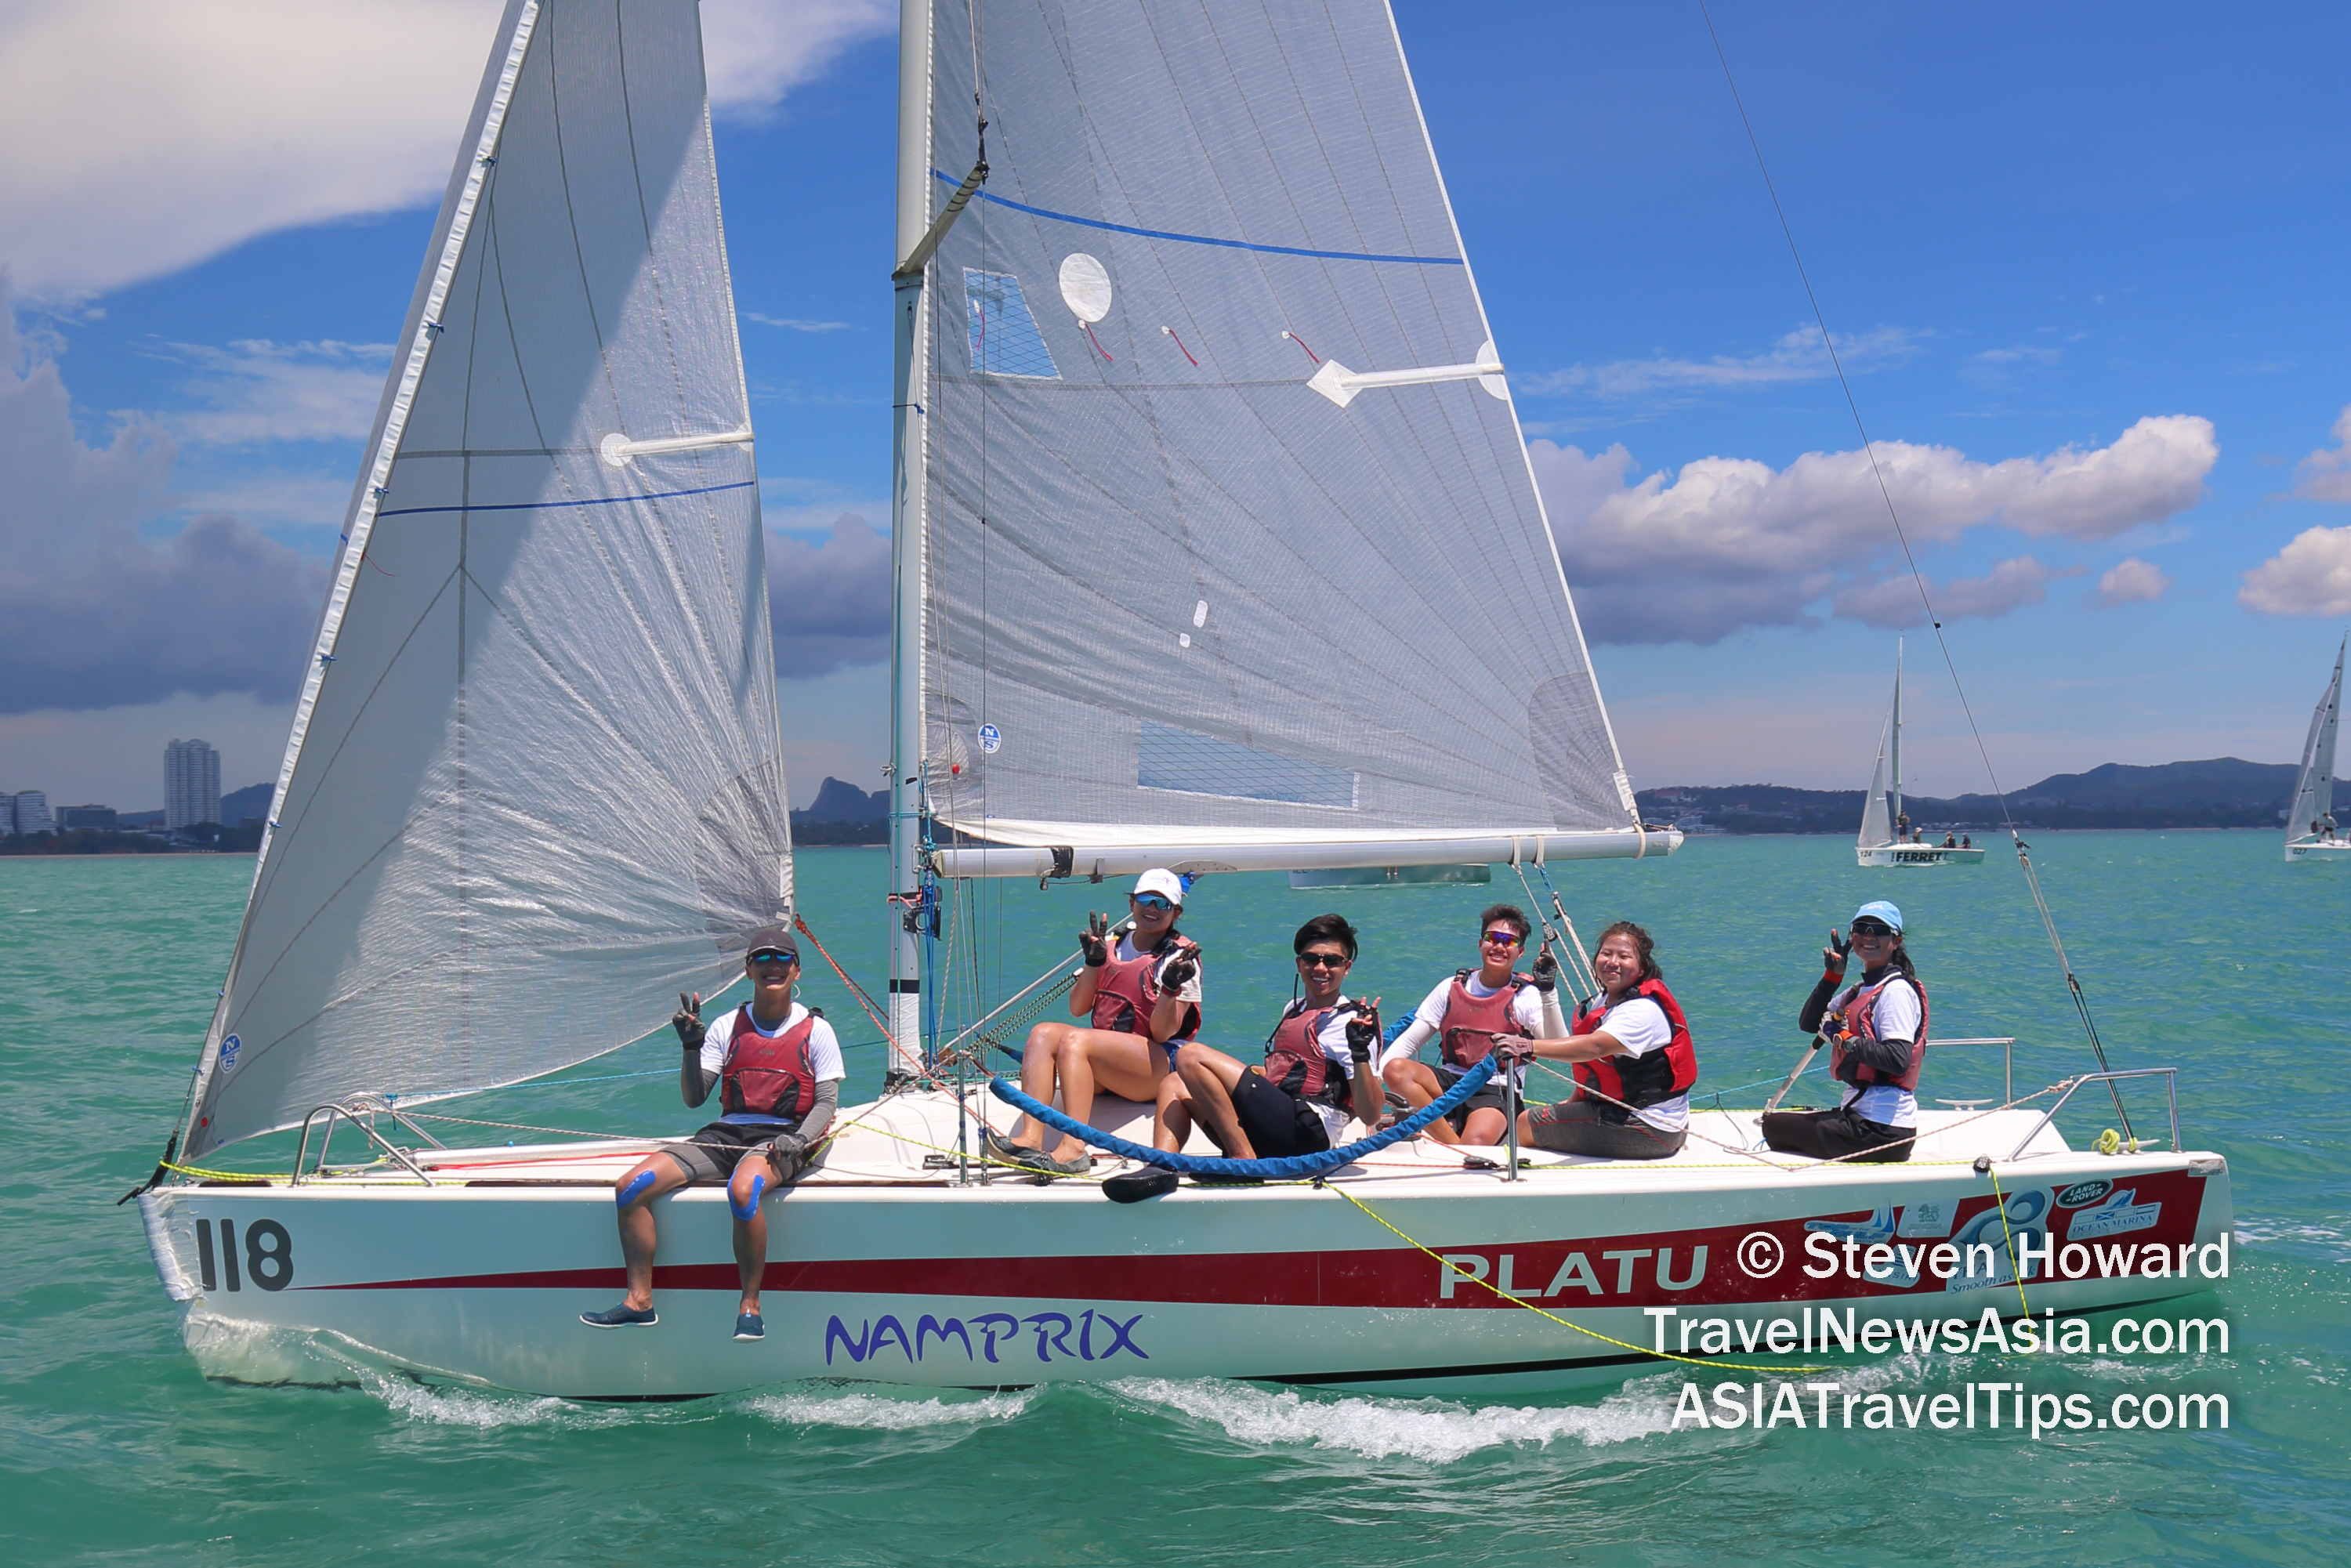 Fun in the sun during the Top of the Gulf Regatta 2019 in Pattaya, Thailand. Picture by Steven Howard of TravelNewsAsia.com Click to enlarge.